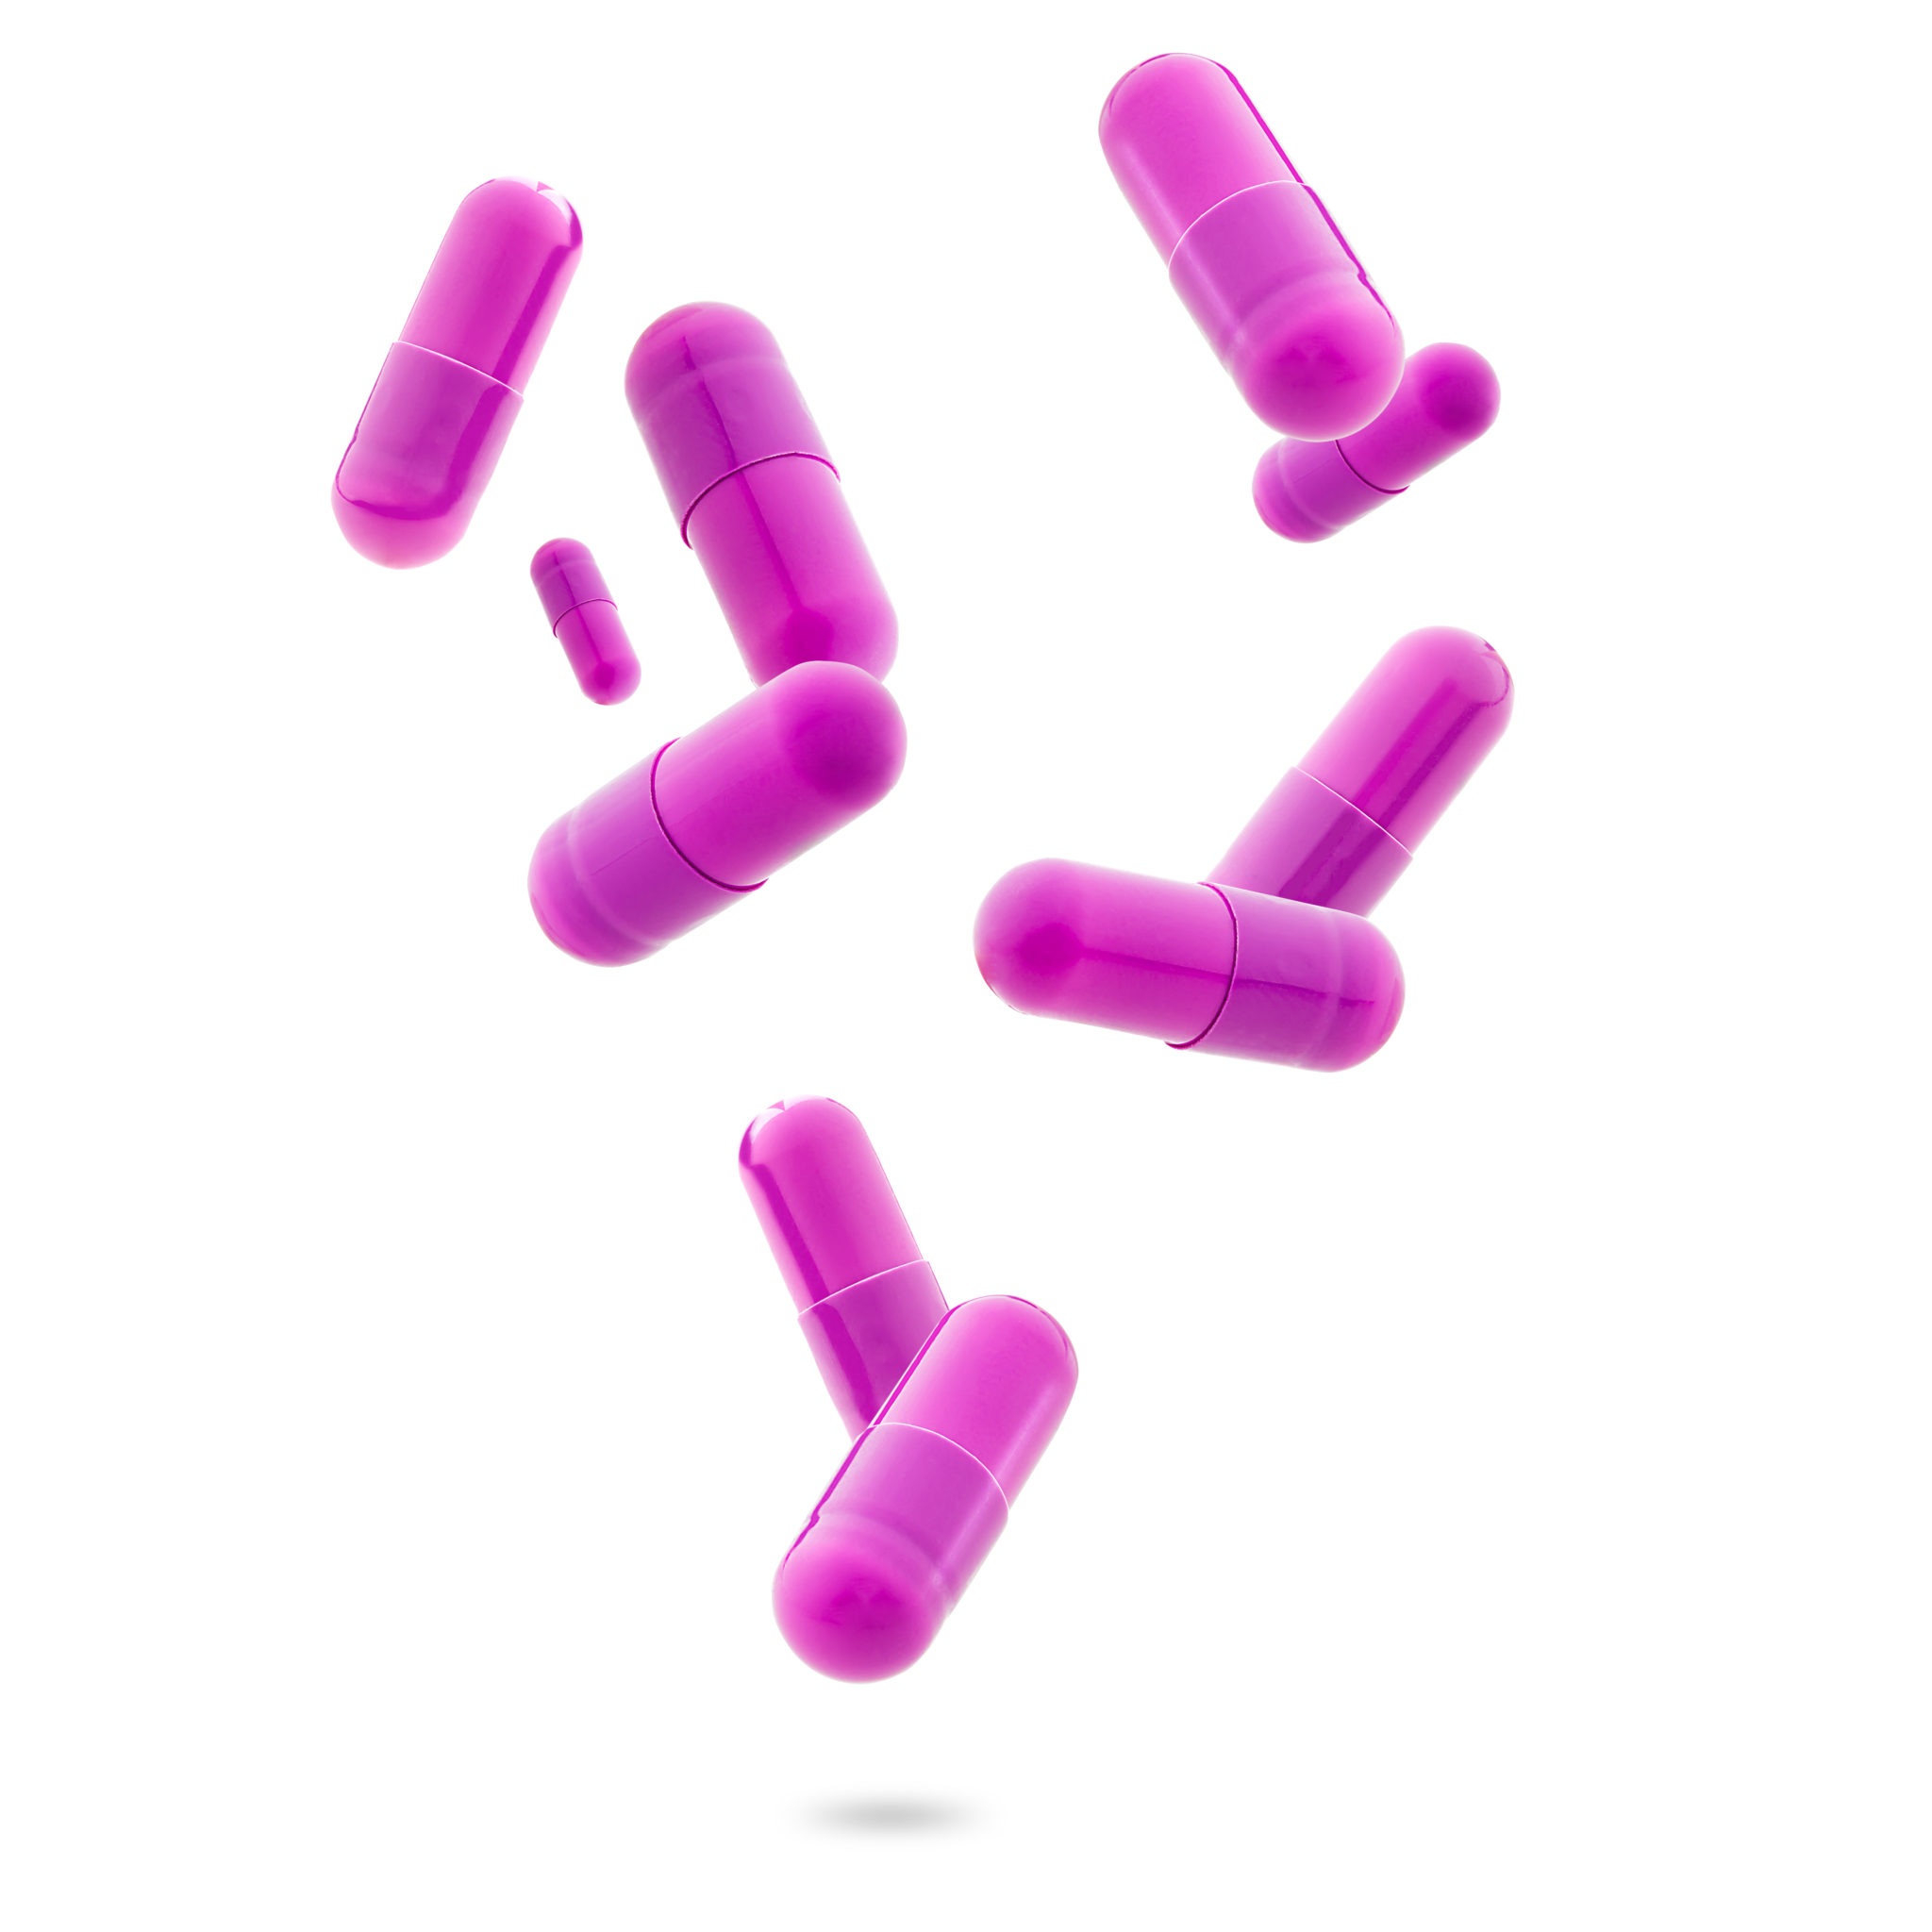 pink medical gel capsules falling down on white background. food supplement, pharmacy concept. plastick capsules pills